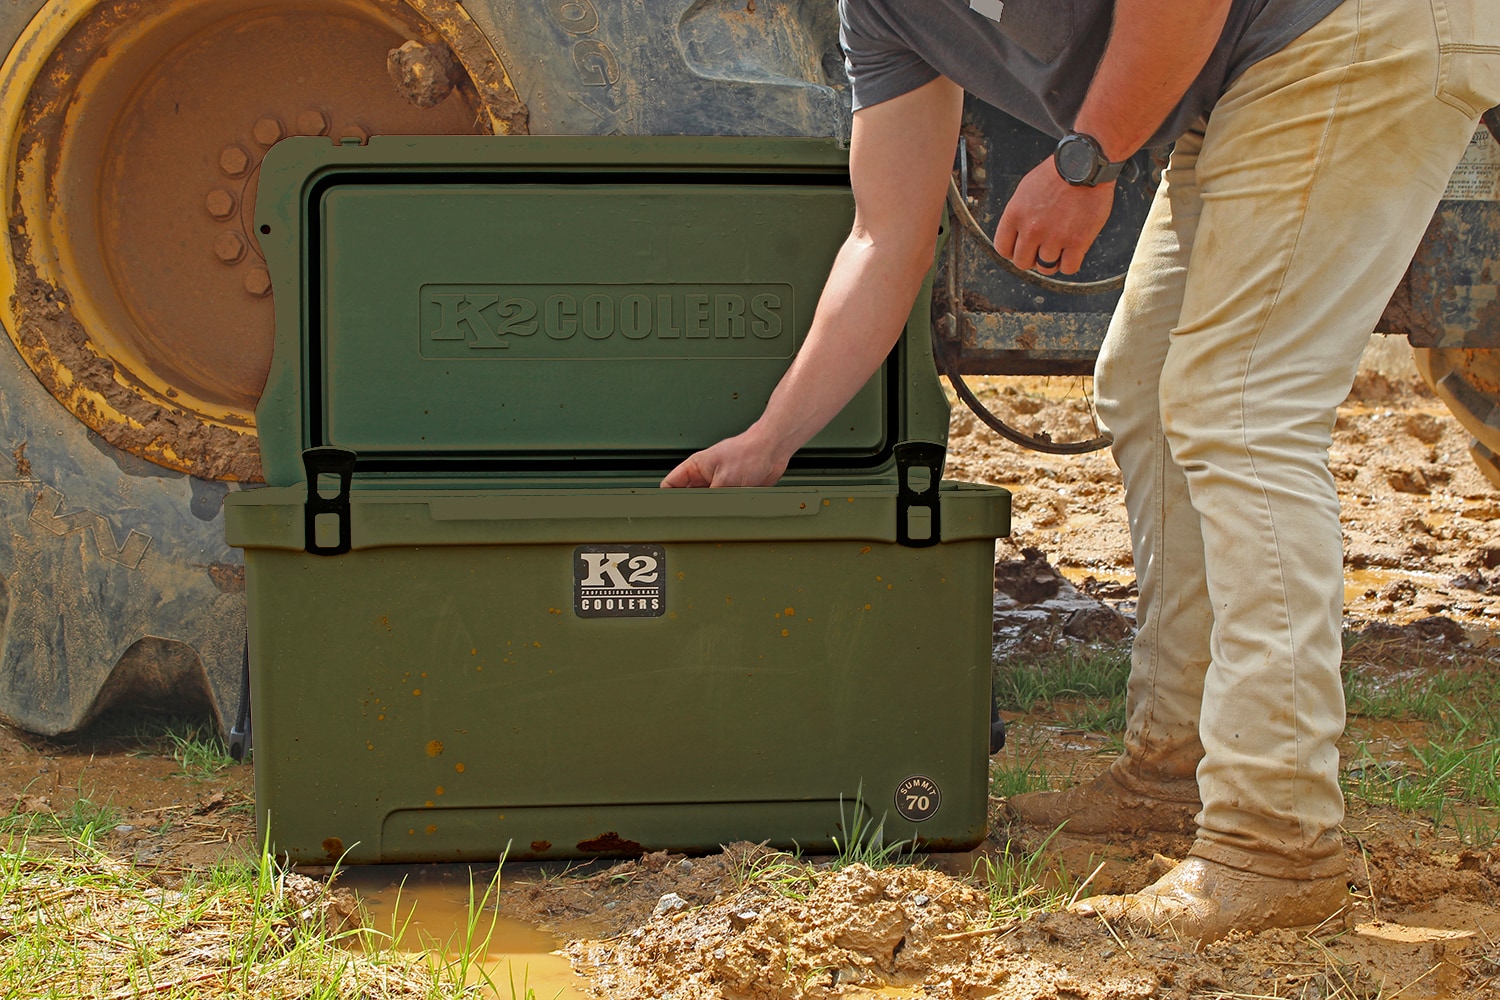 K2 Coolers (@K2Coolers) / X